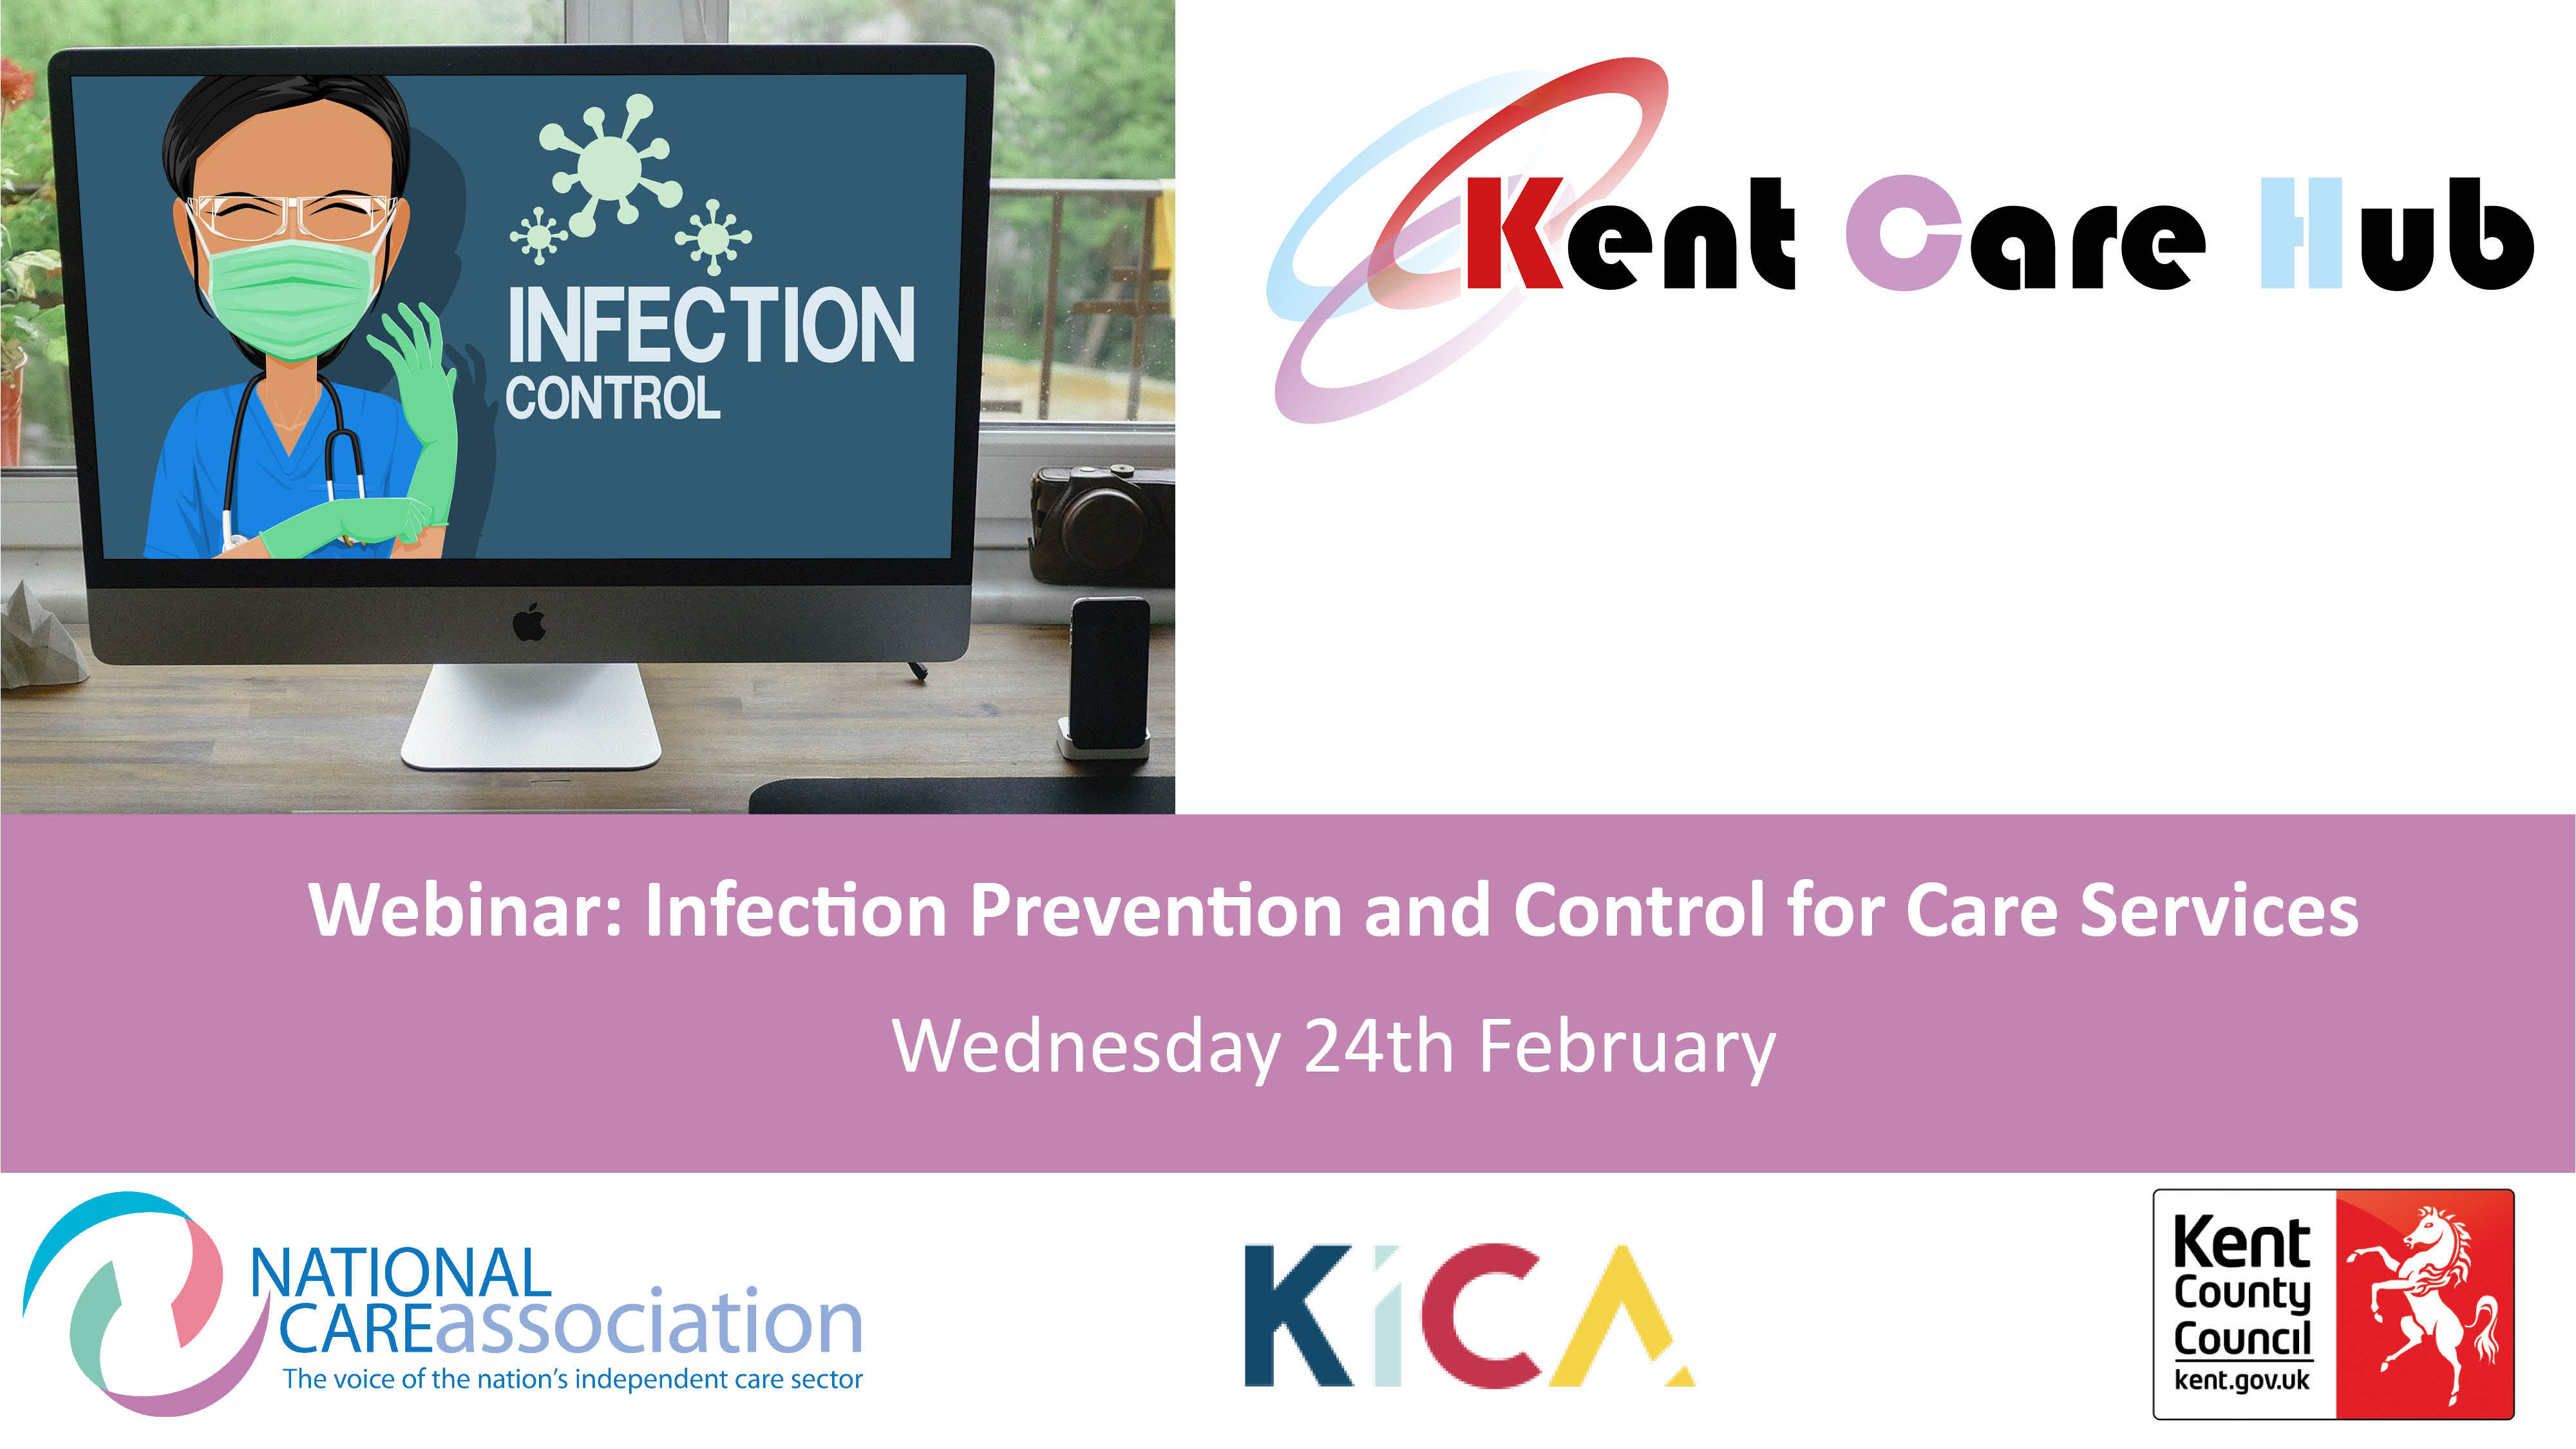 Webinar: Training on Infection Prevention and Control for Care Services